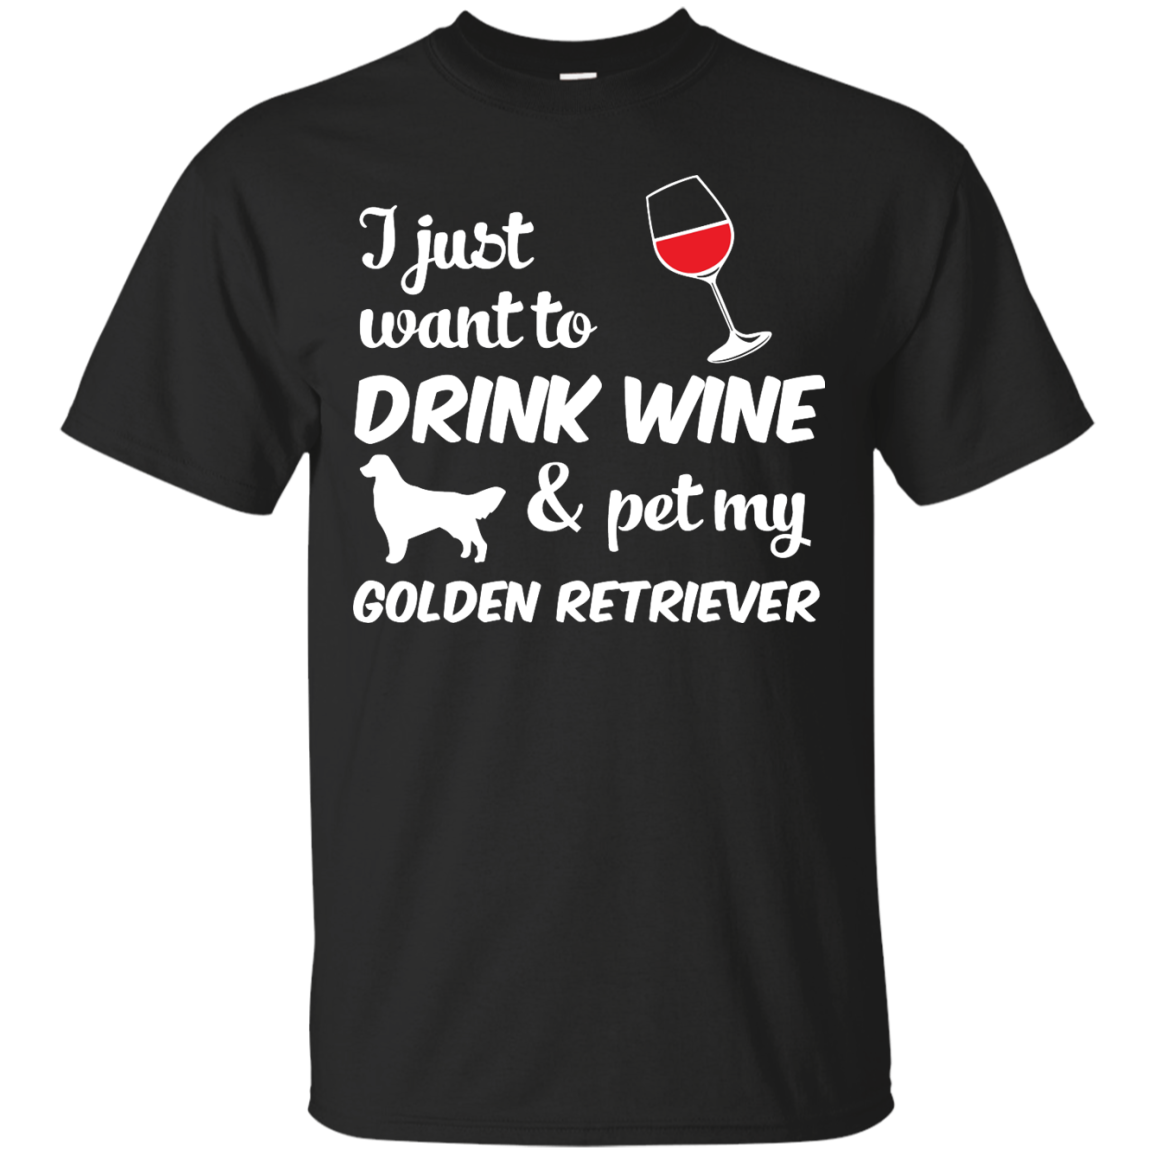 I Just Want To Drink Wine & Pet My Golden Retriever T-shirt